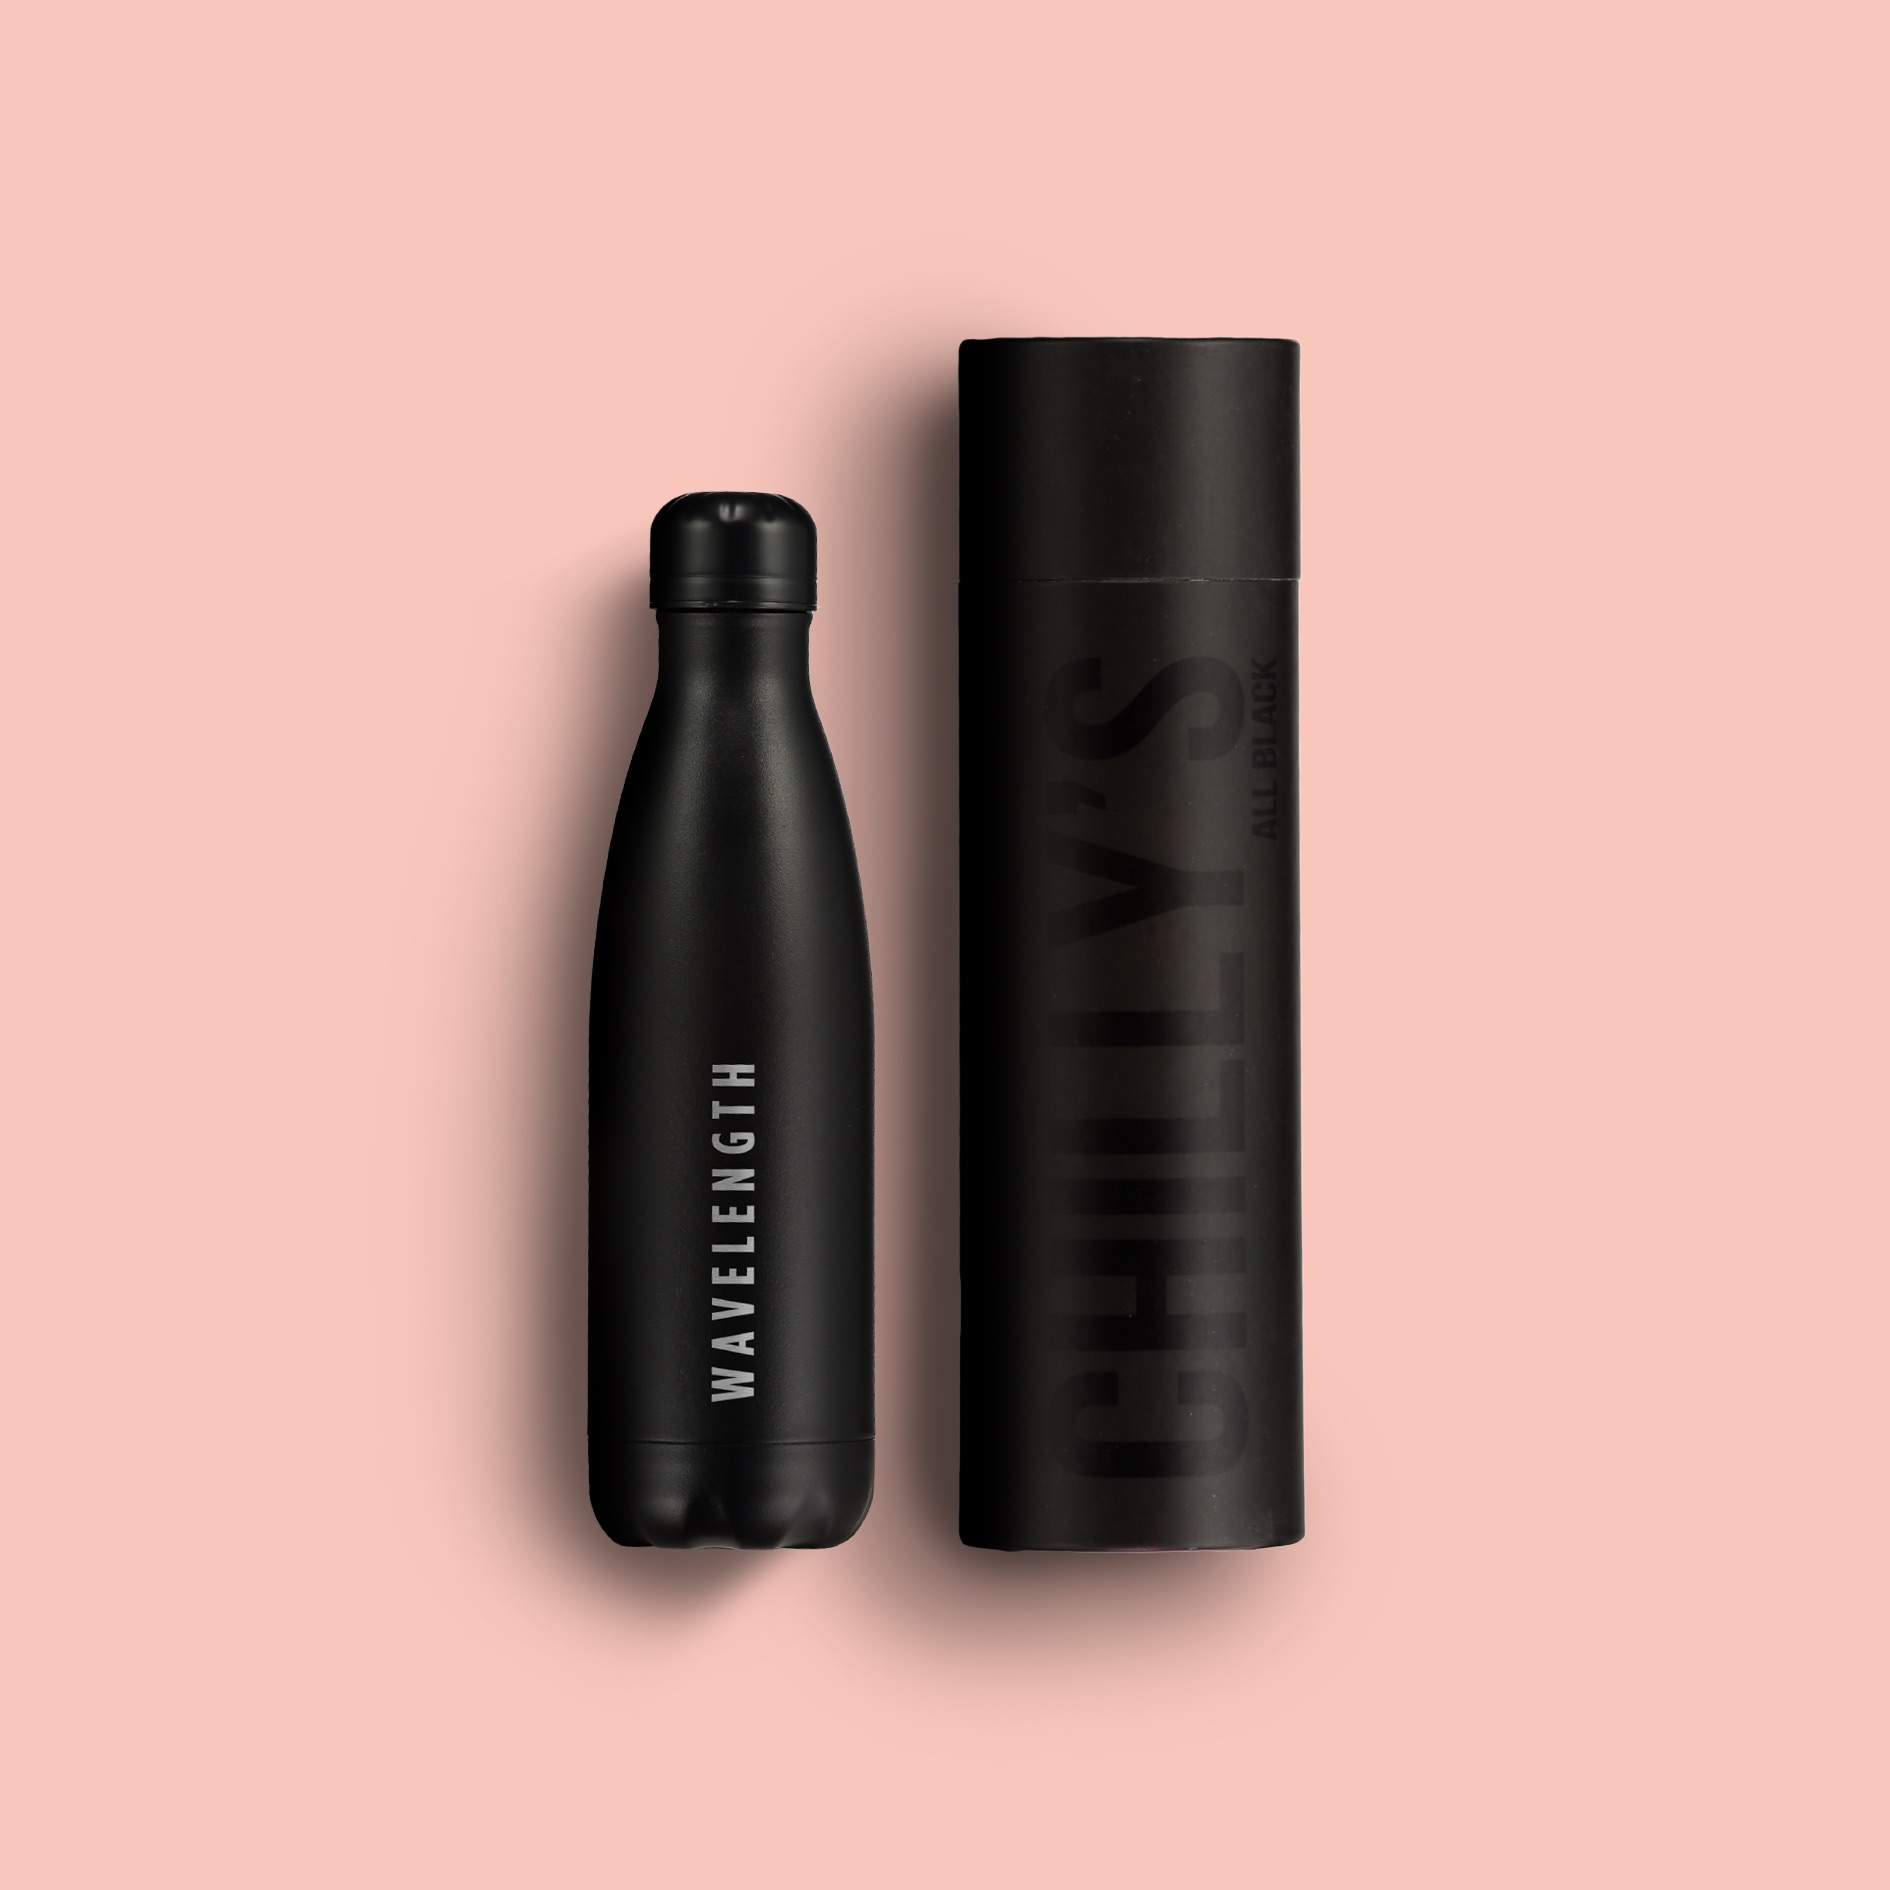 Wavelength x Chilly's reusable water bottle